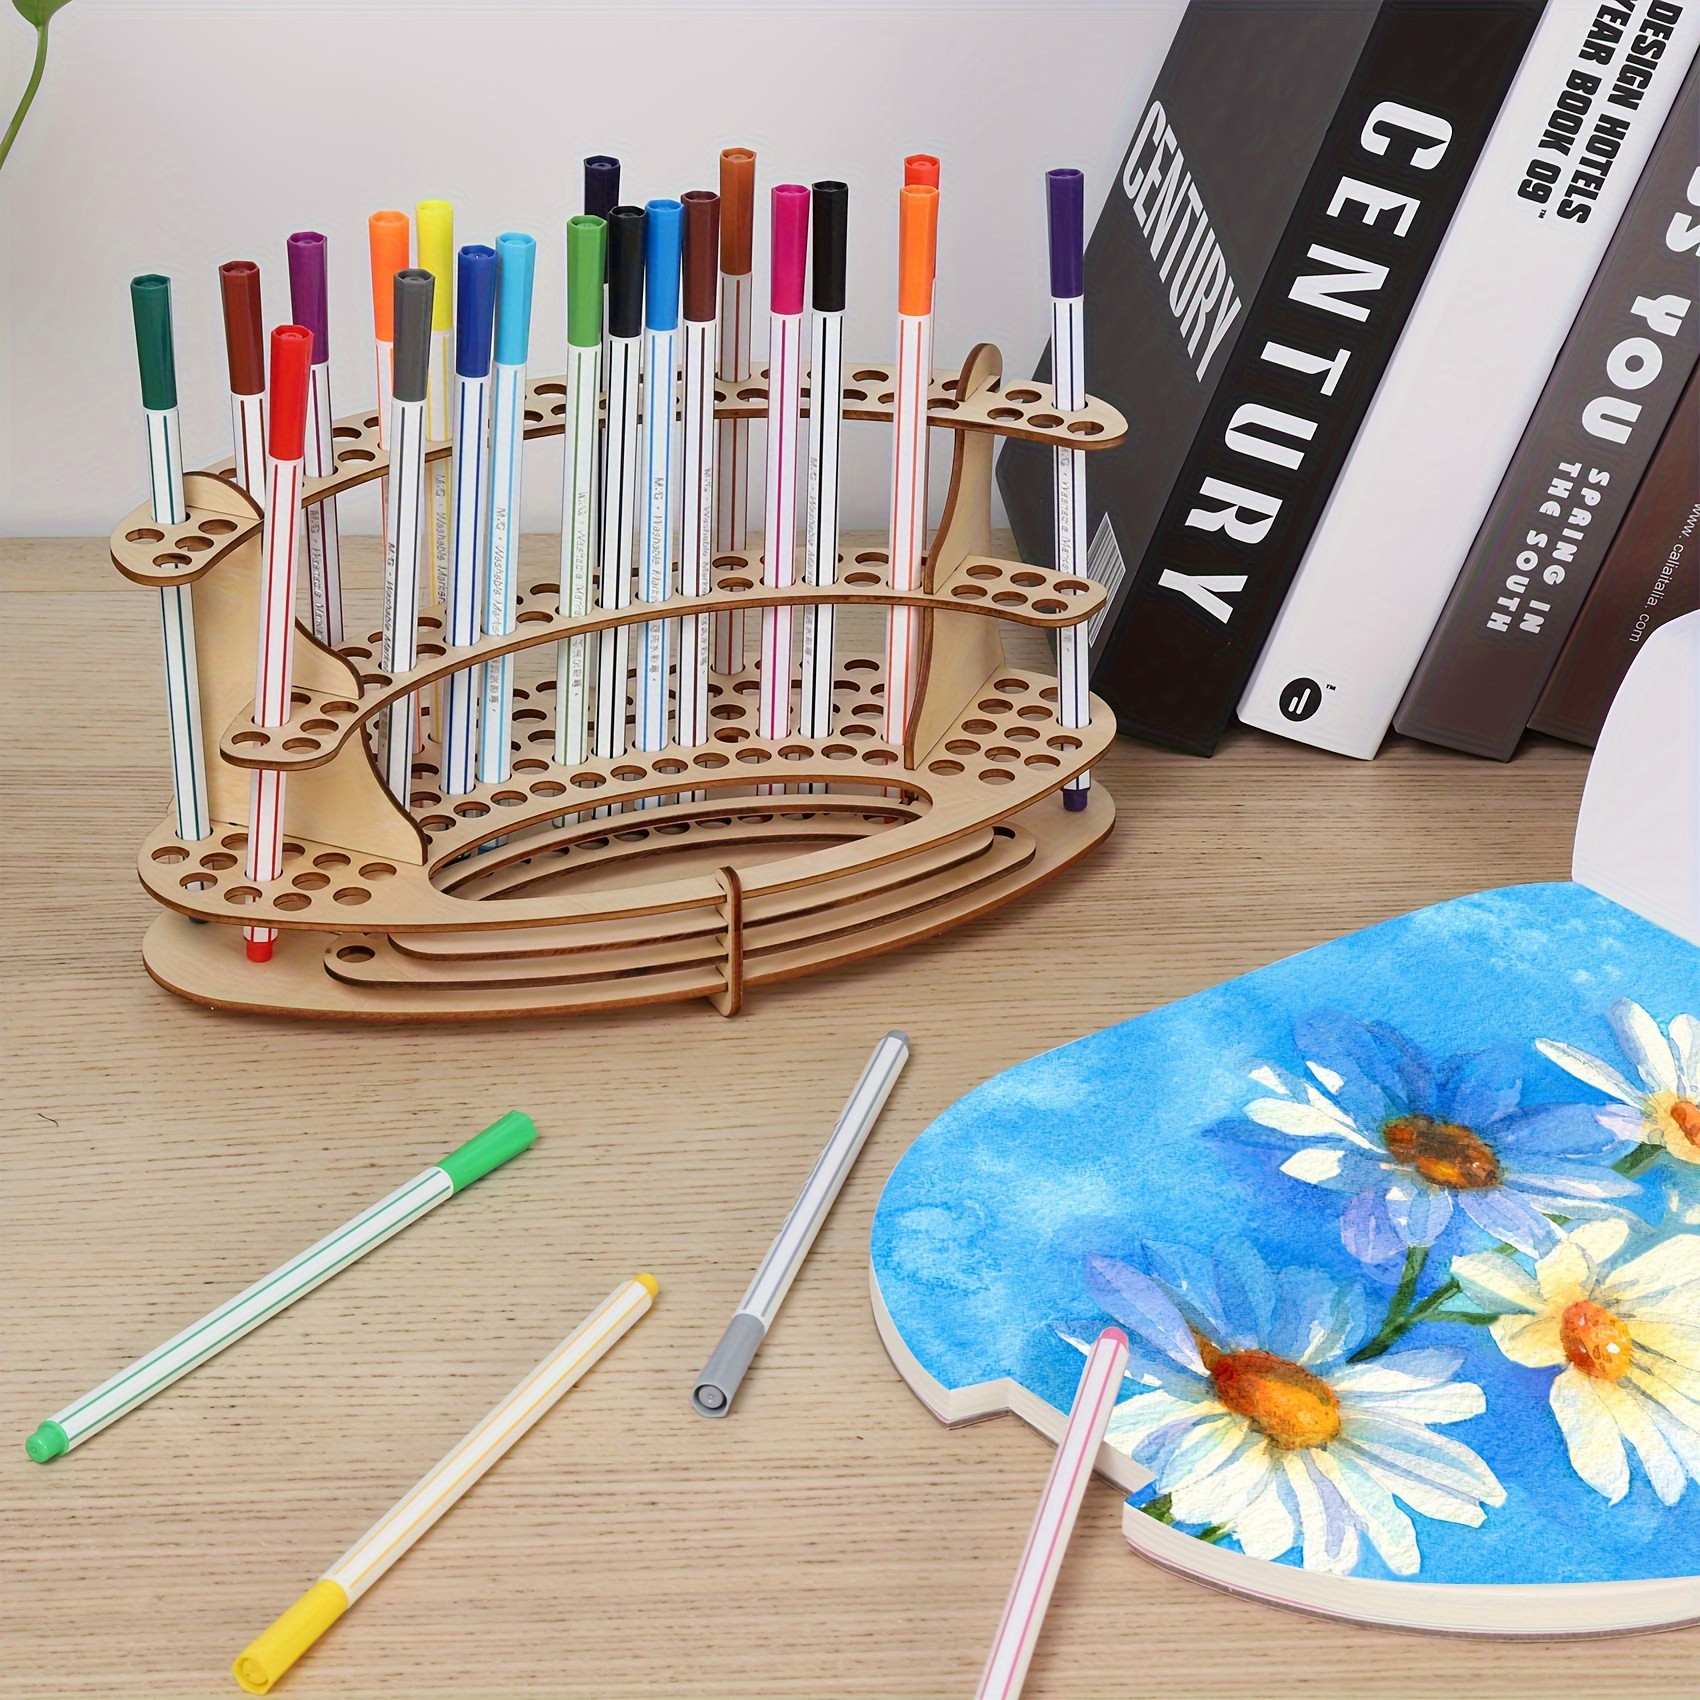  Artist Paint Brush Holder,67 Holes Wooden Paint Brush Holder  Stand For Artist, Paint Brush Holder,Paintbrush Holder Organizer, For  Colored Pencils Paint Brushes Makeup Brushes